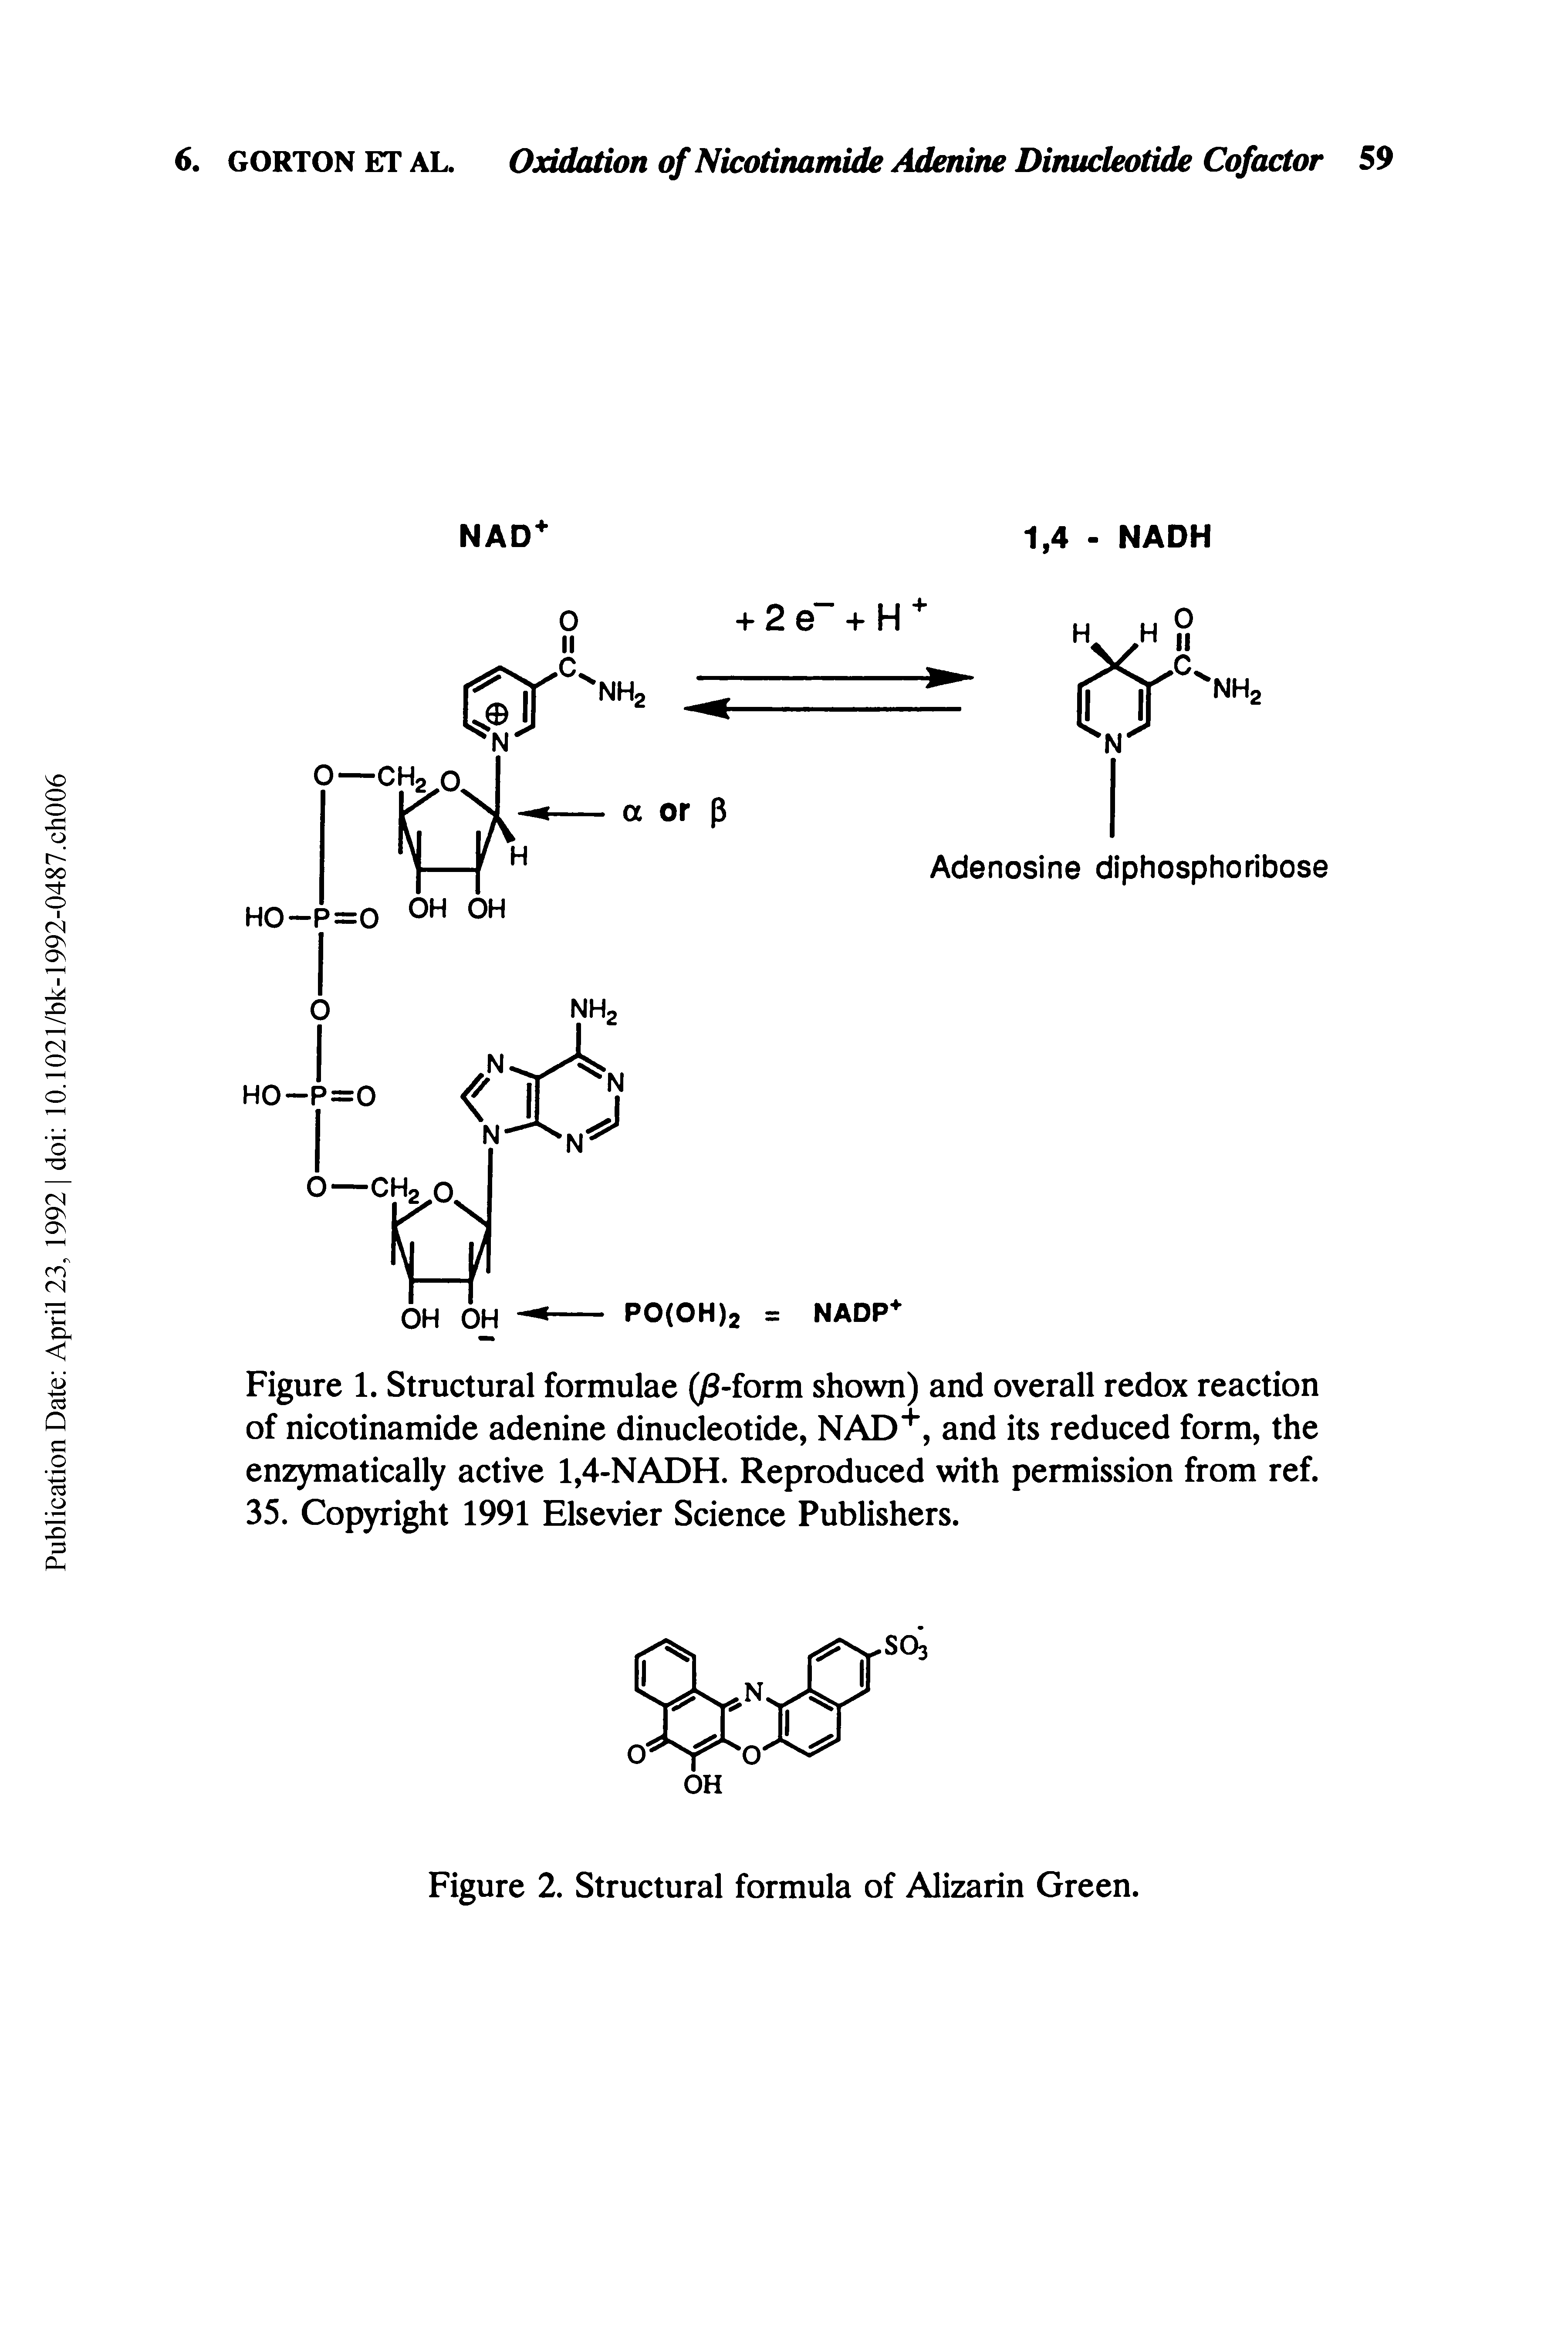 Figure 1. Structural formulae (/3-form shown) and overall redox reaction of nicotinamide adenine dinucleotide, NAD+, and its reduced form, the enzymatically active 1,4-NADH. Reproduced with permission from ref. 35. Copyright 1991 Elsevier Science Publishers.